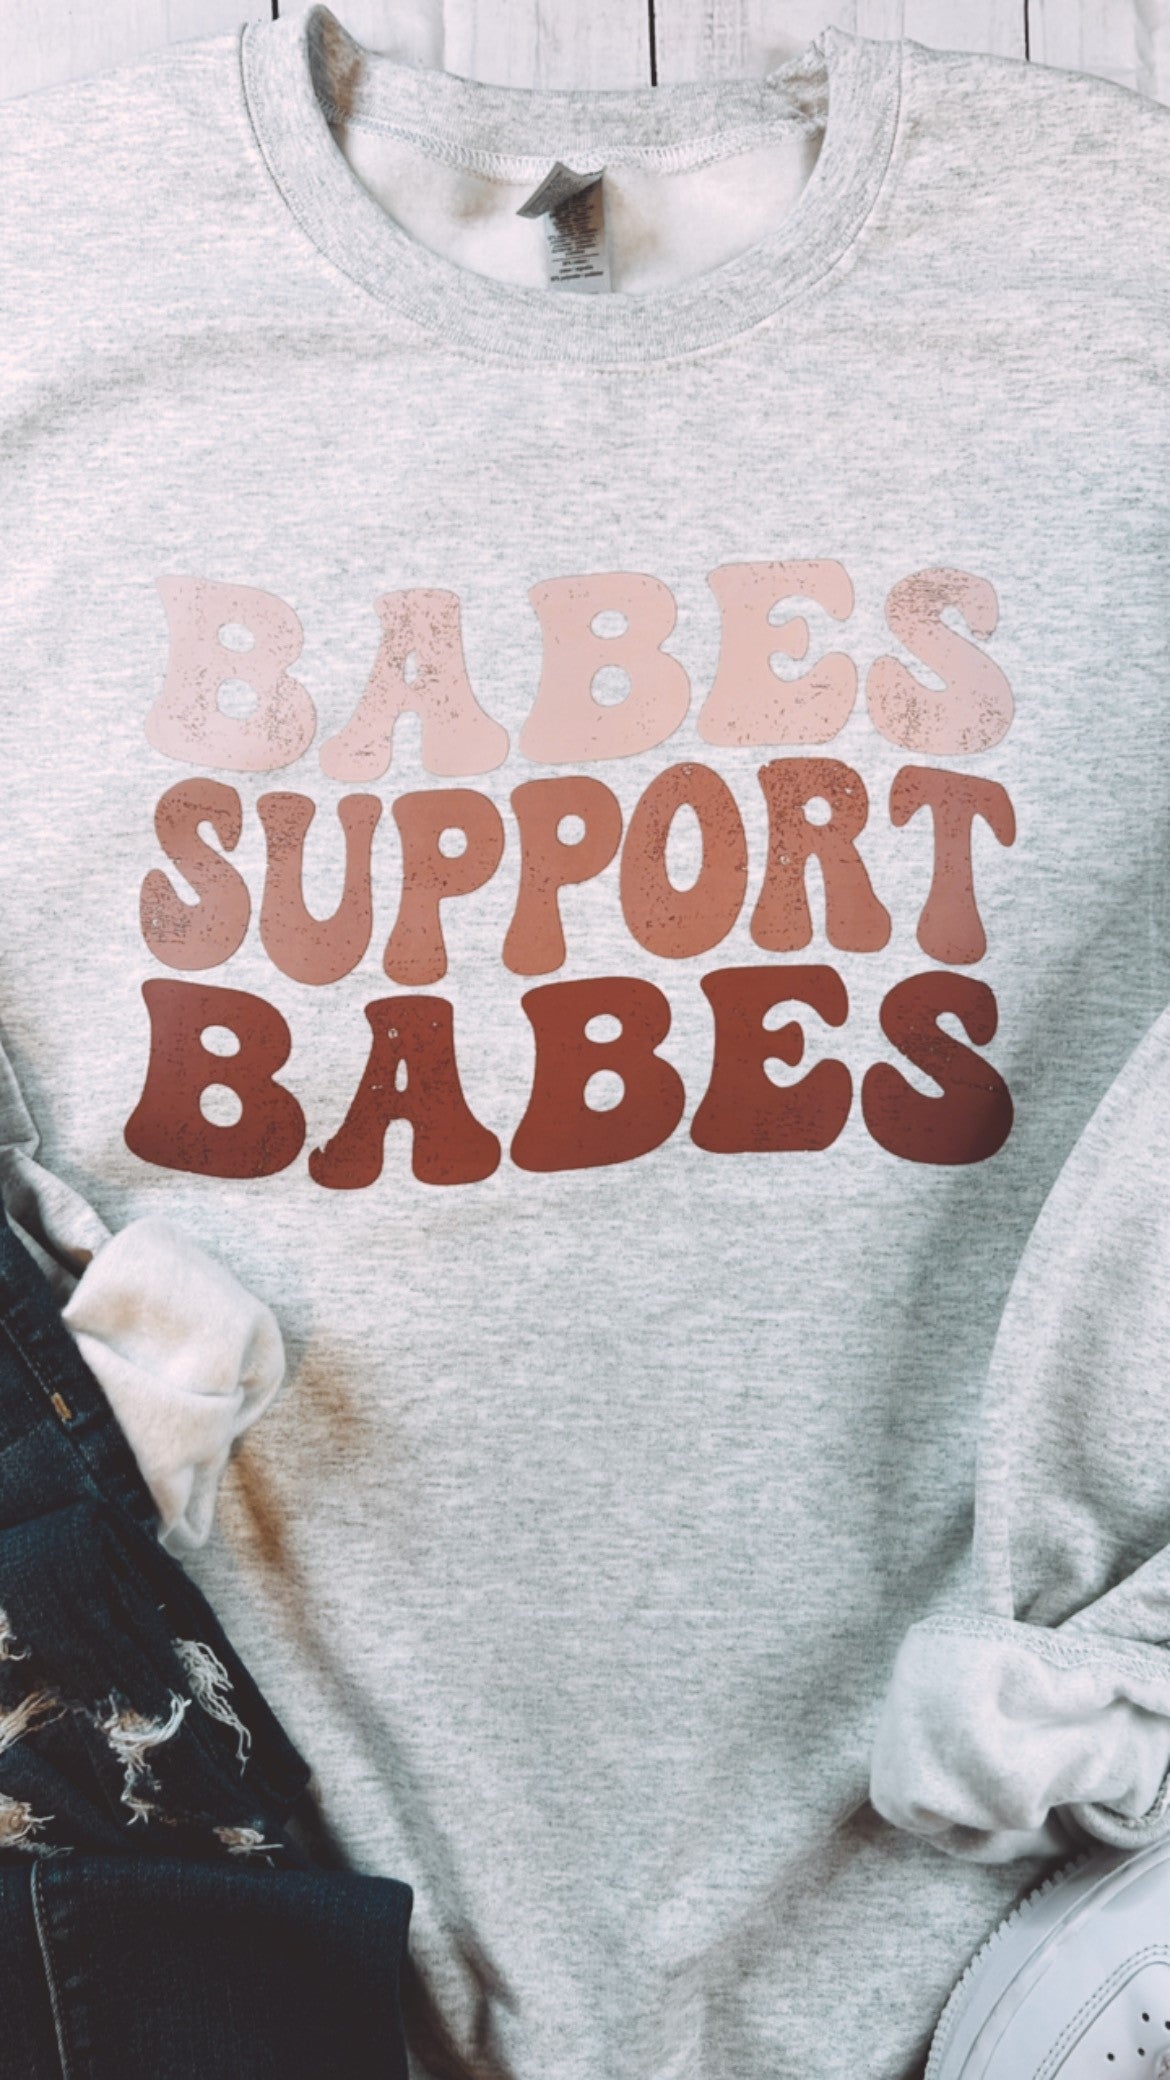 Babes support babes Crew